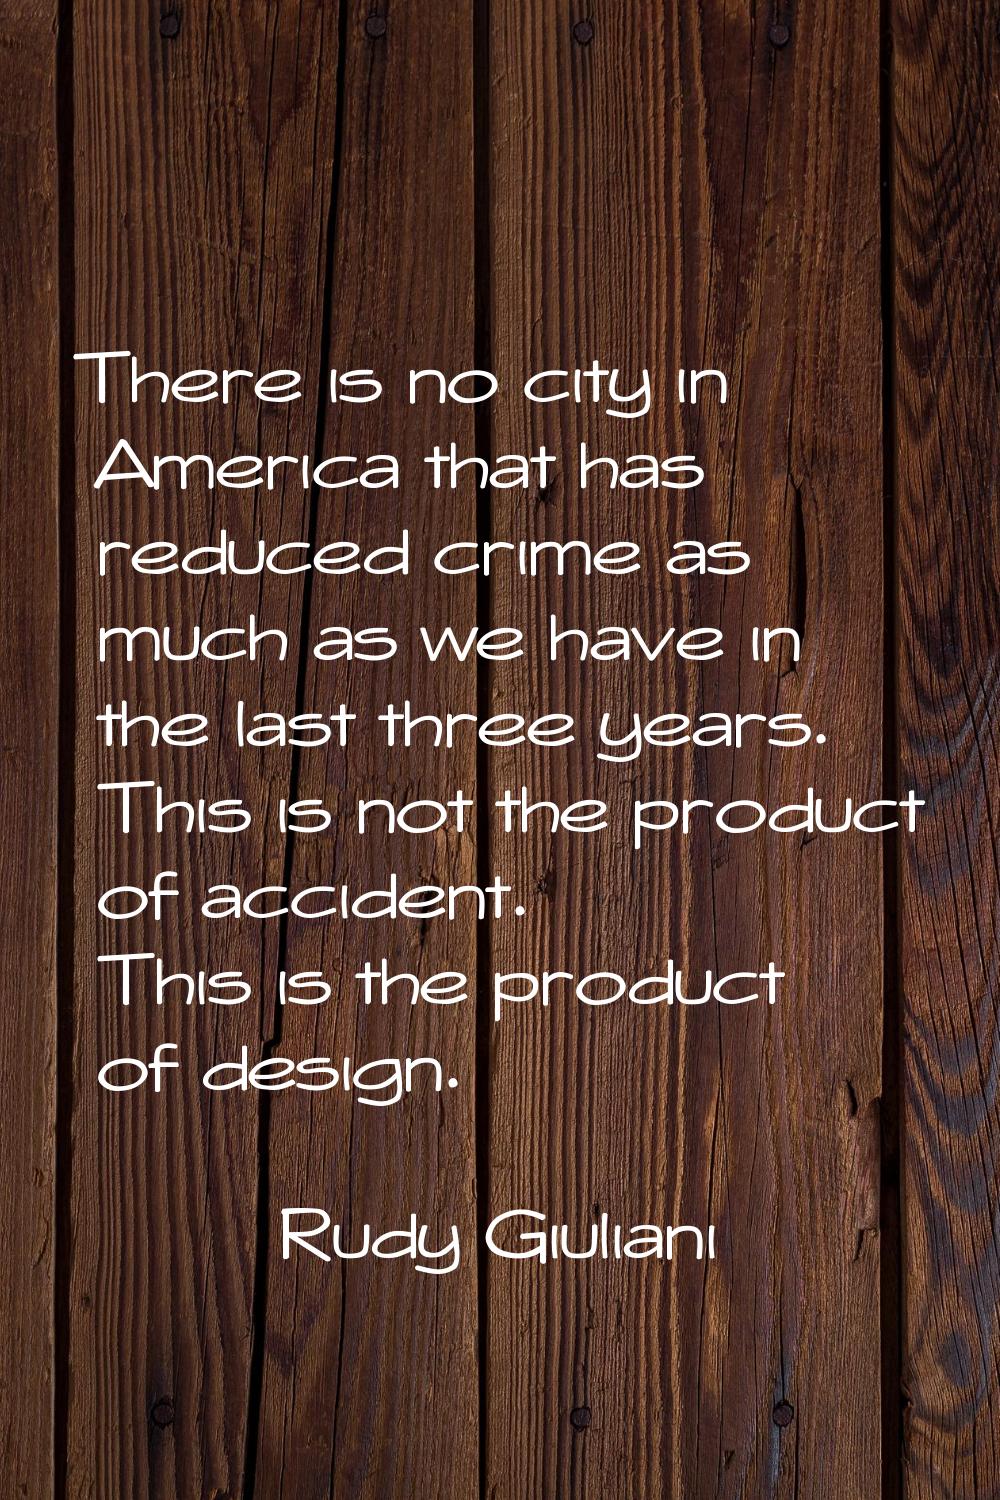 There is no city in America that has reduced crime as much as we have in the last three years. This